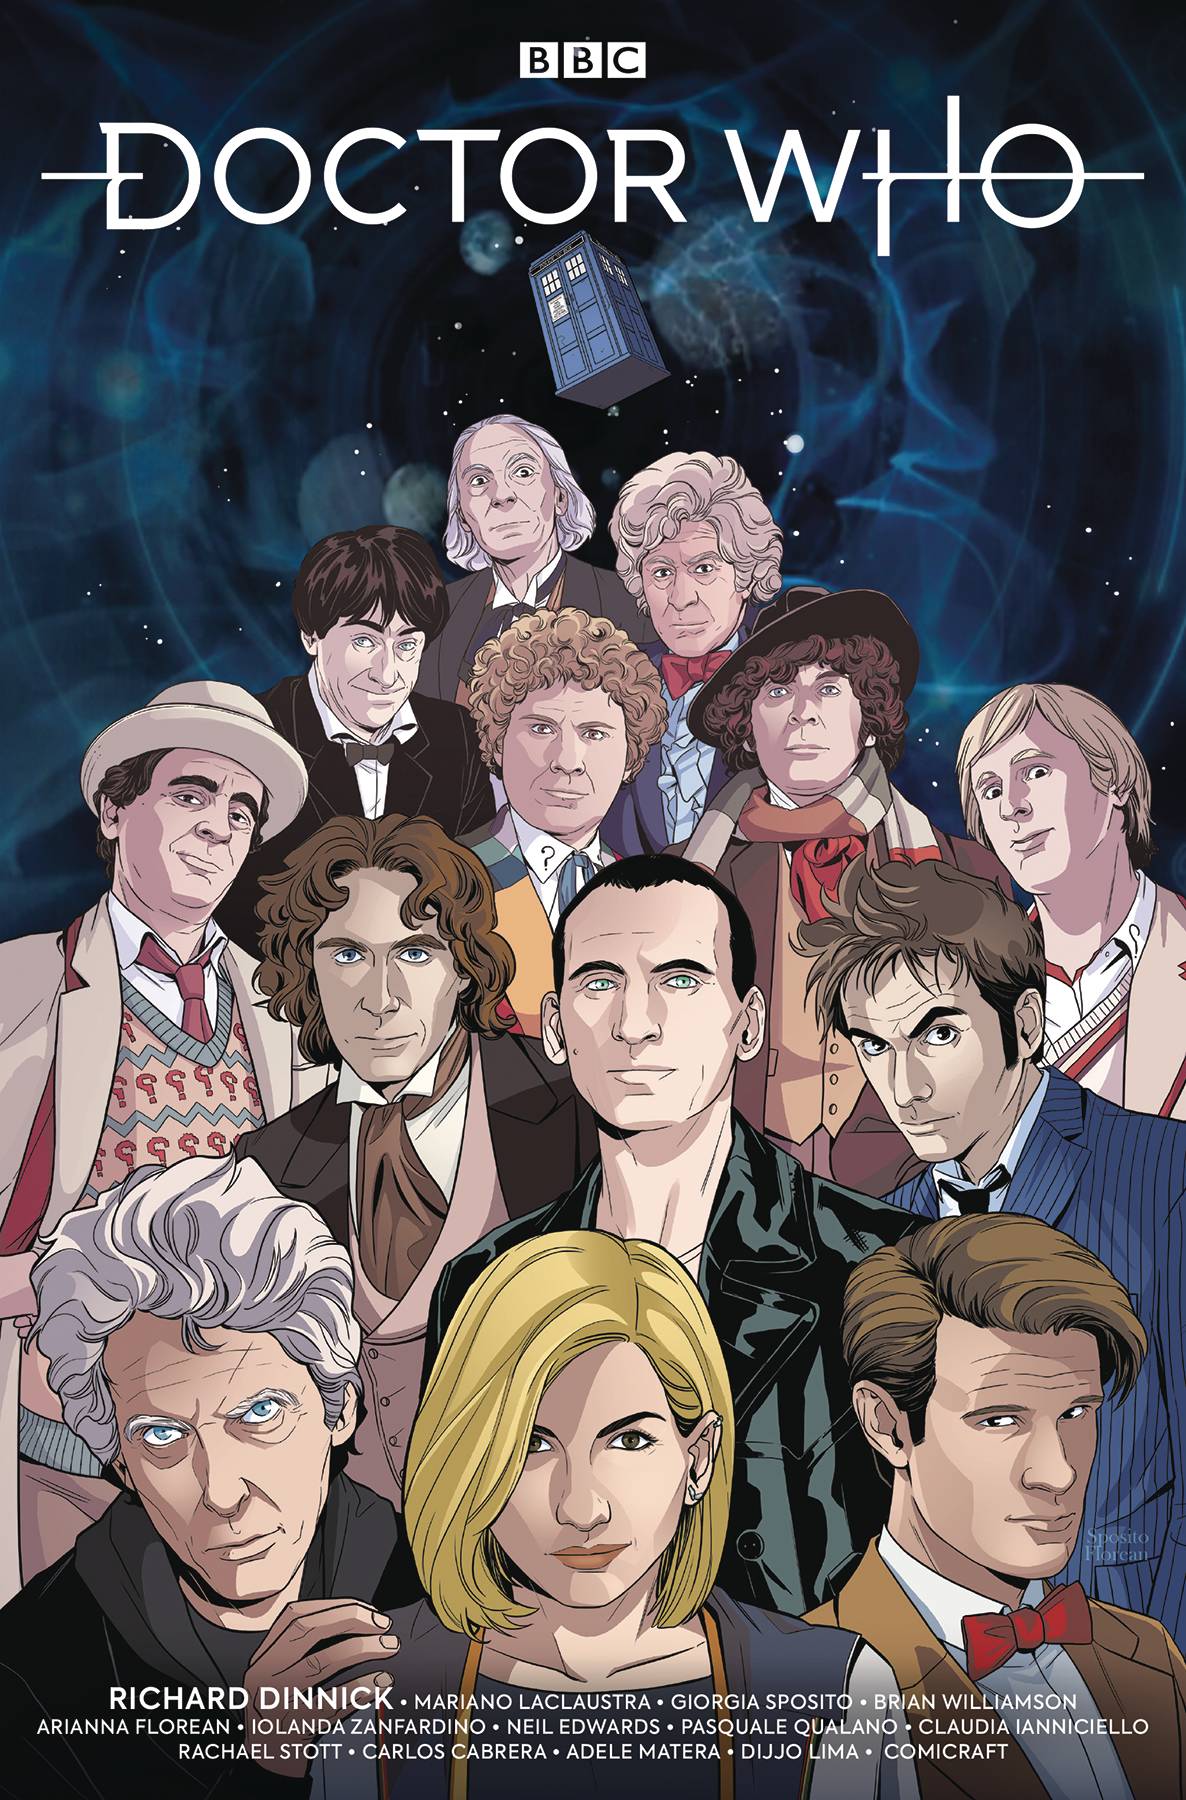 Doctor Who 13th #0 New York ComicCon Exclusive Cover